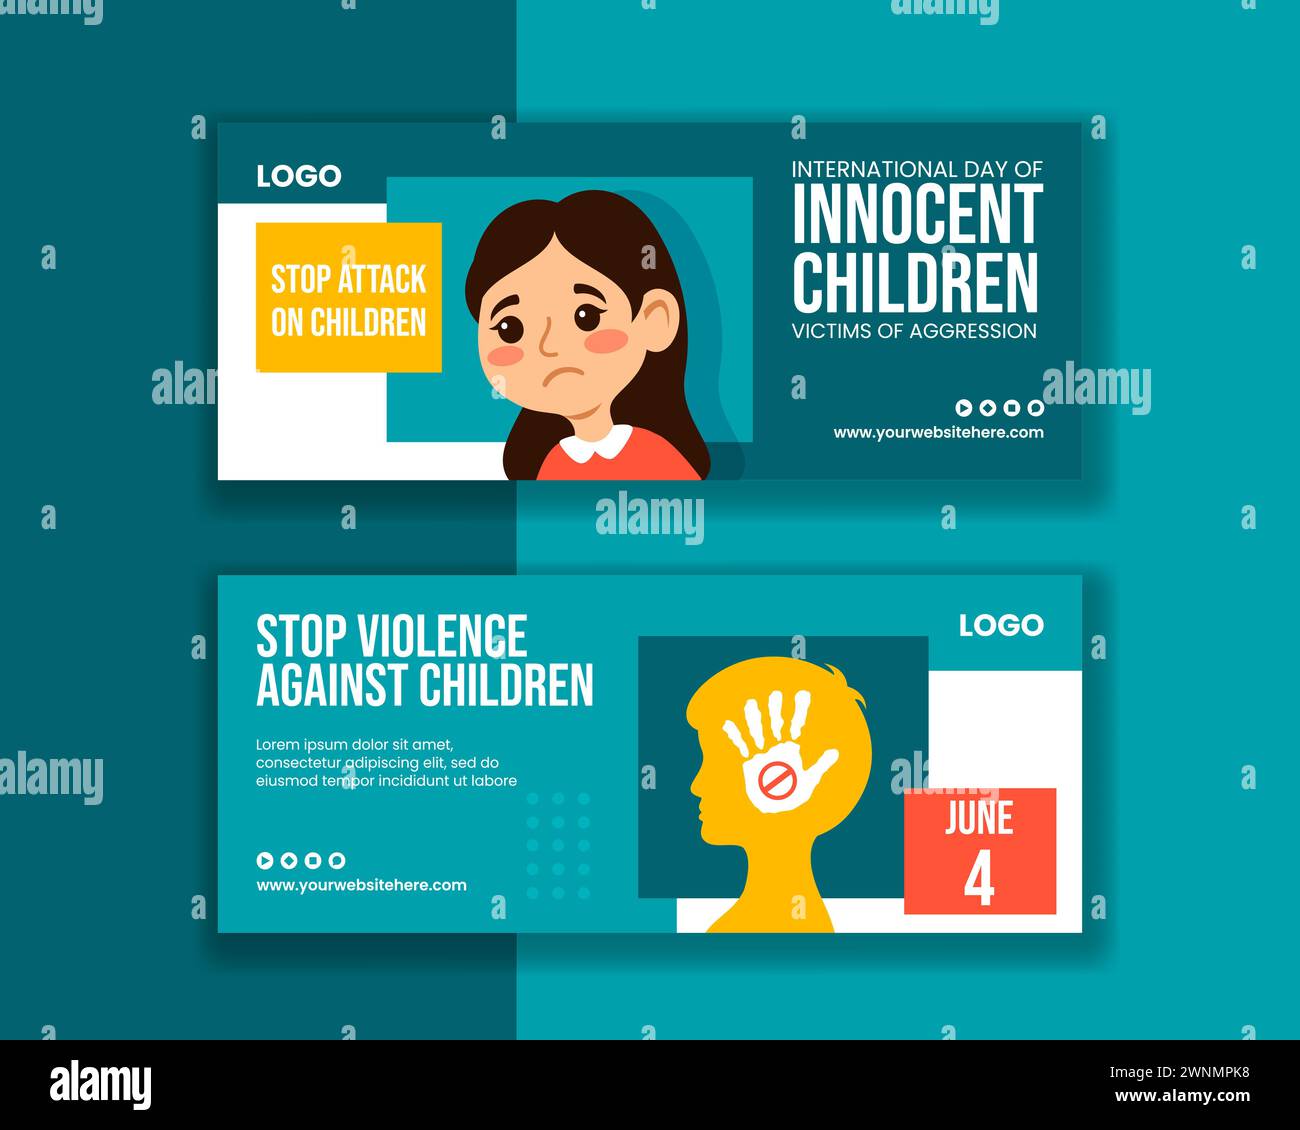 Innocent Children Victims of Aggression Horizontal Banner Templates Background Illustration Stock Vector